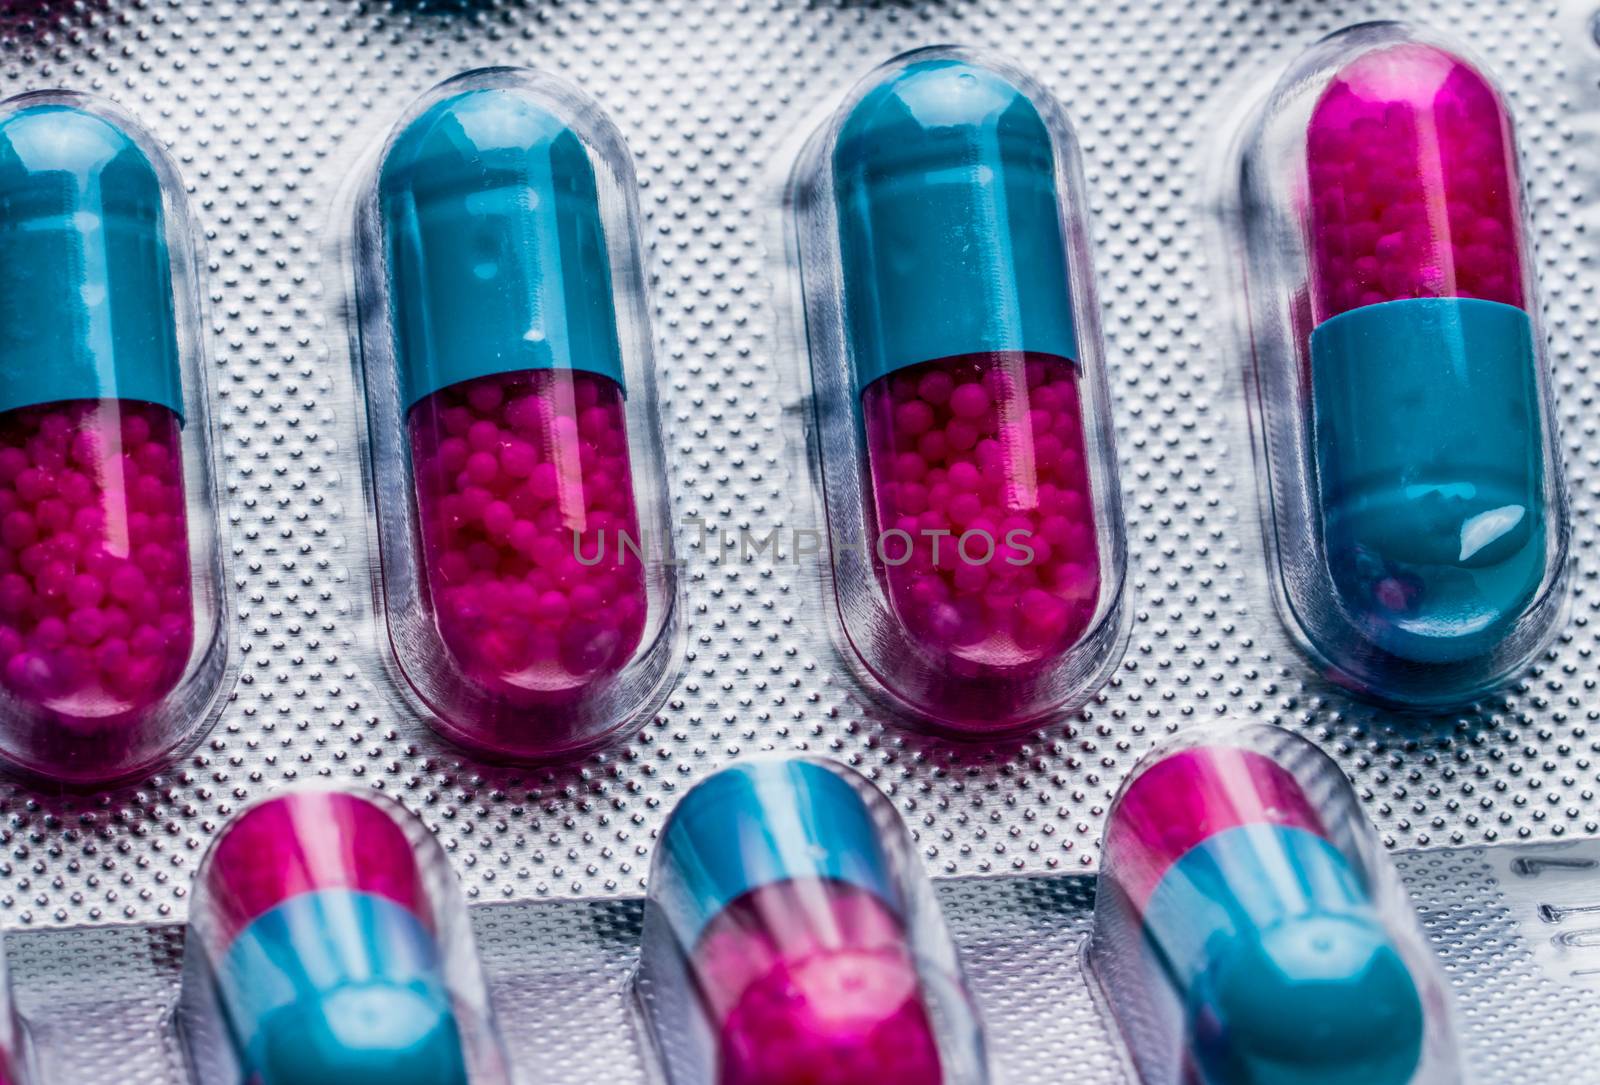 Macro shot detail of blue, pink capsule with granule in side pills. Pills in blister pack. Pharmaceutical dosage form and packaging. Itraconazole 100 mg : Anti-fungal medicine. Pharmaceutical industry. Pharmacy background. Global healthcare concept.